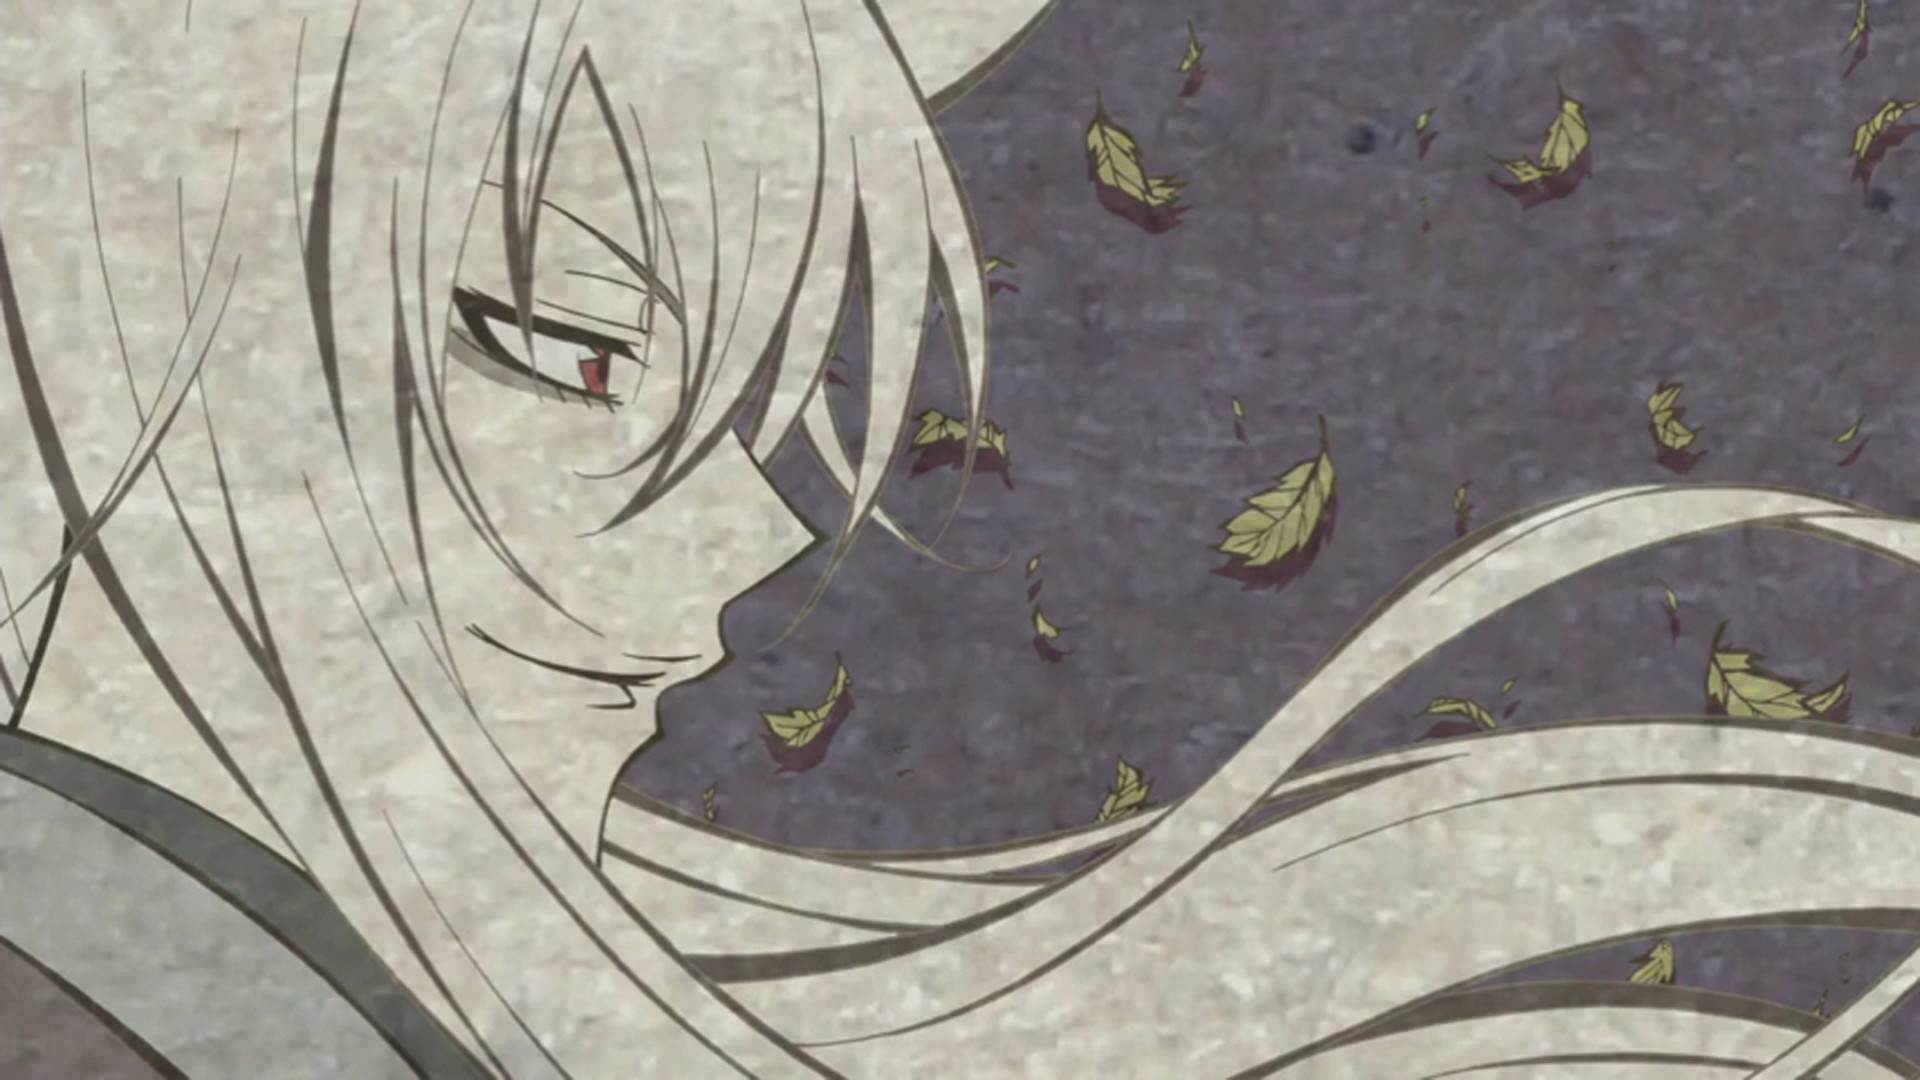  The official page for kamisama kiss in north america 25+ Free Anime Kamisama Kiss Wallpapers